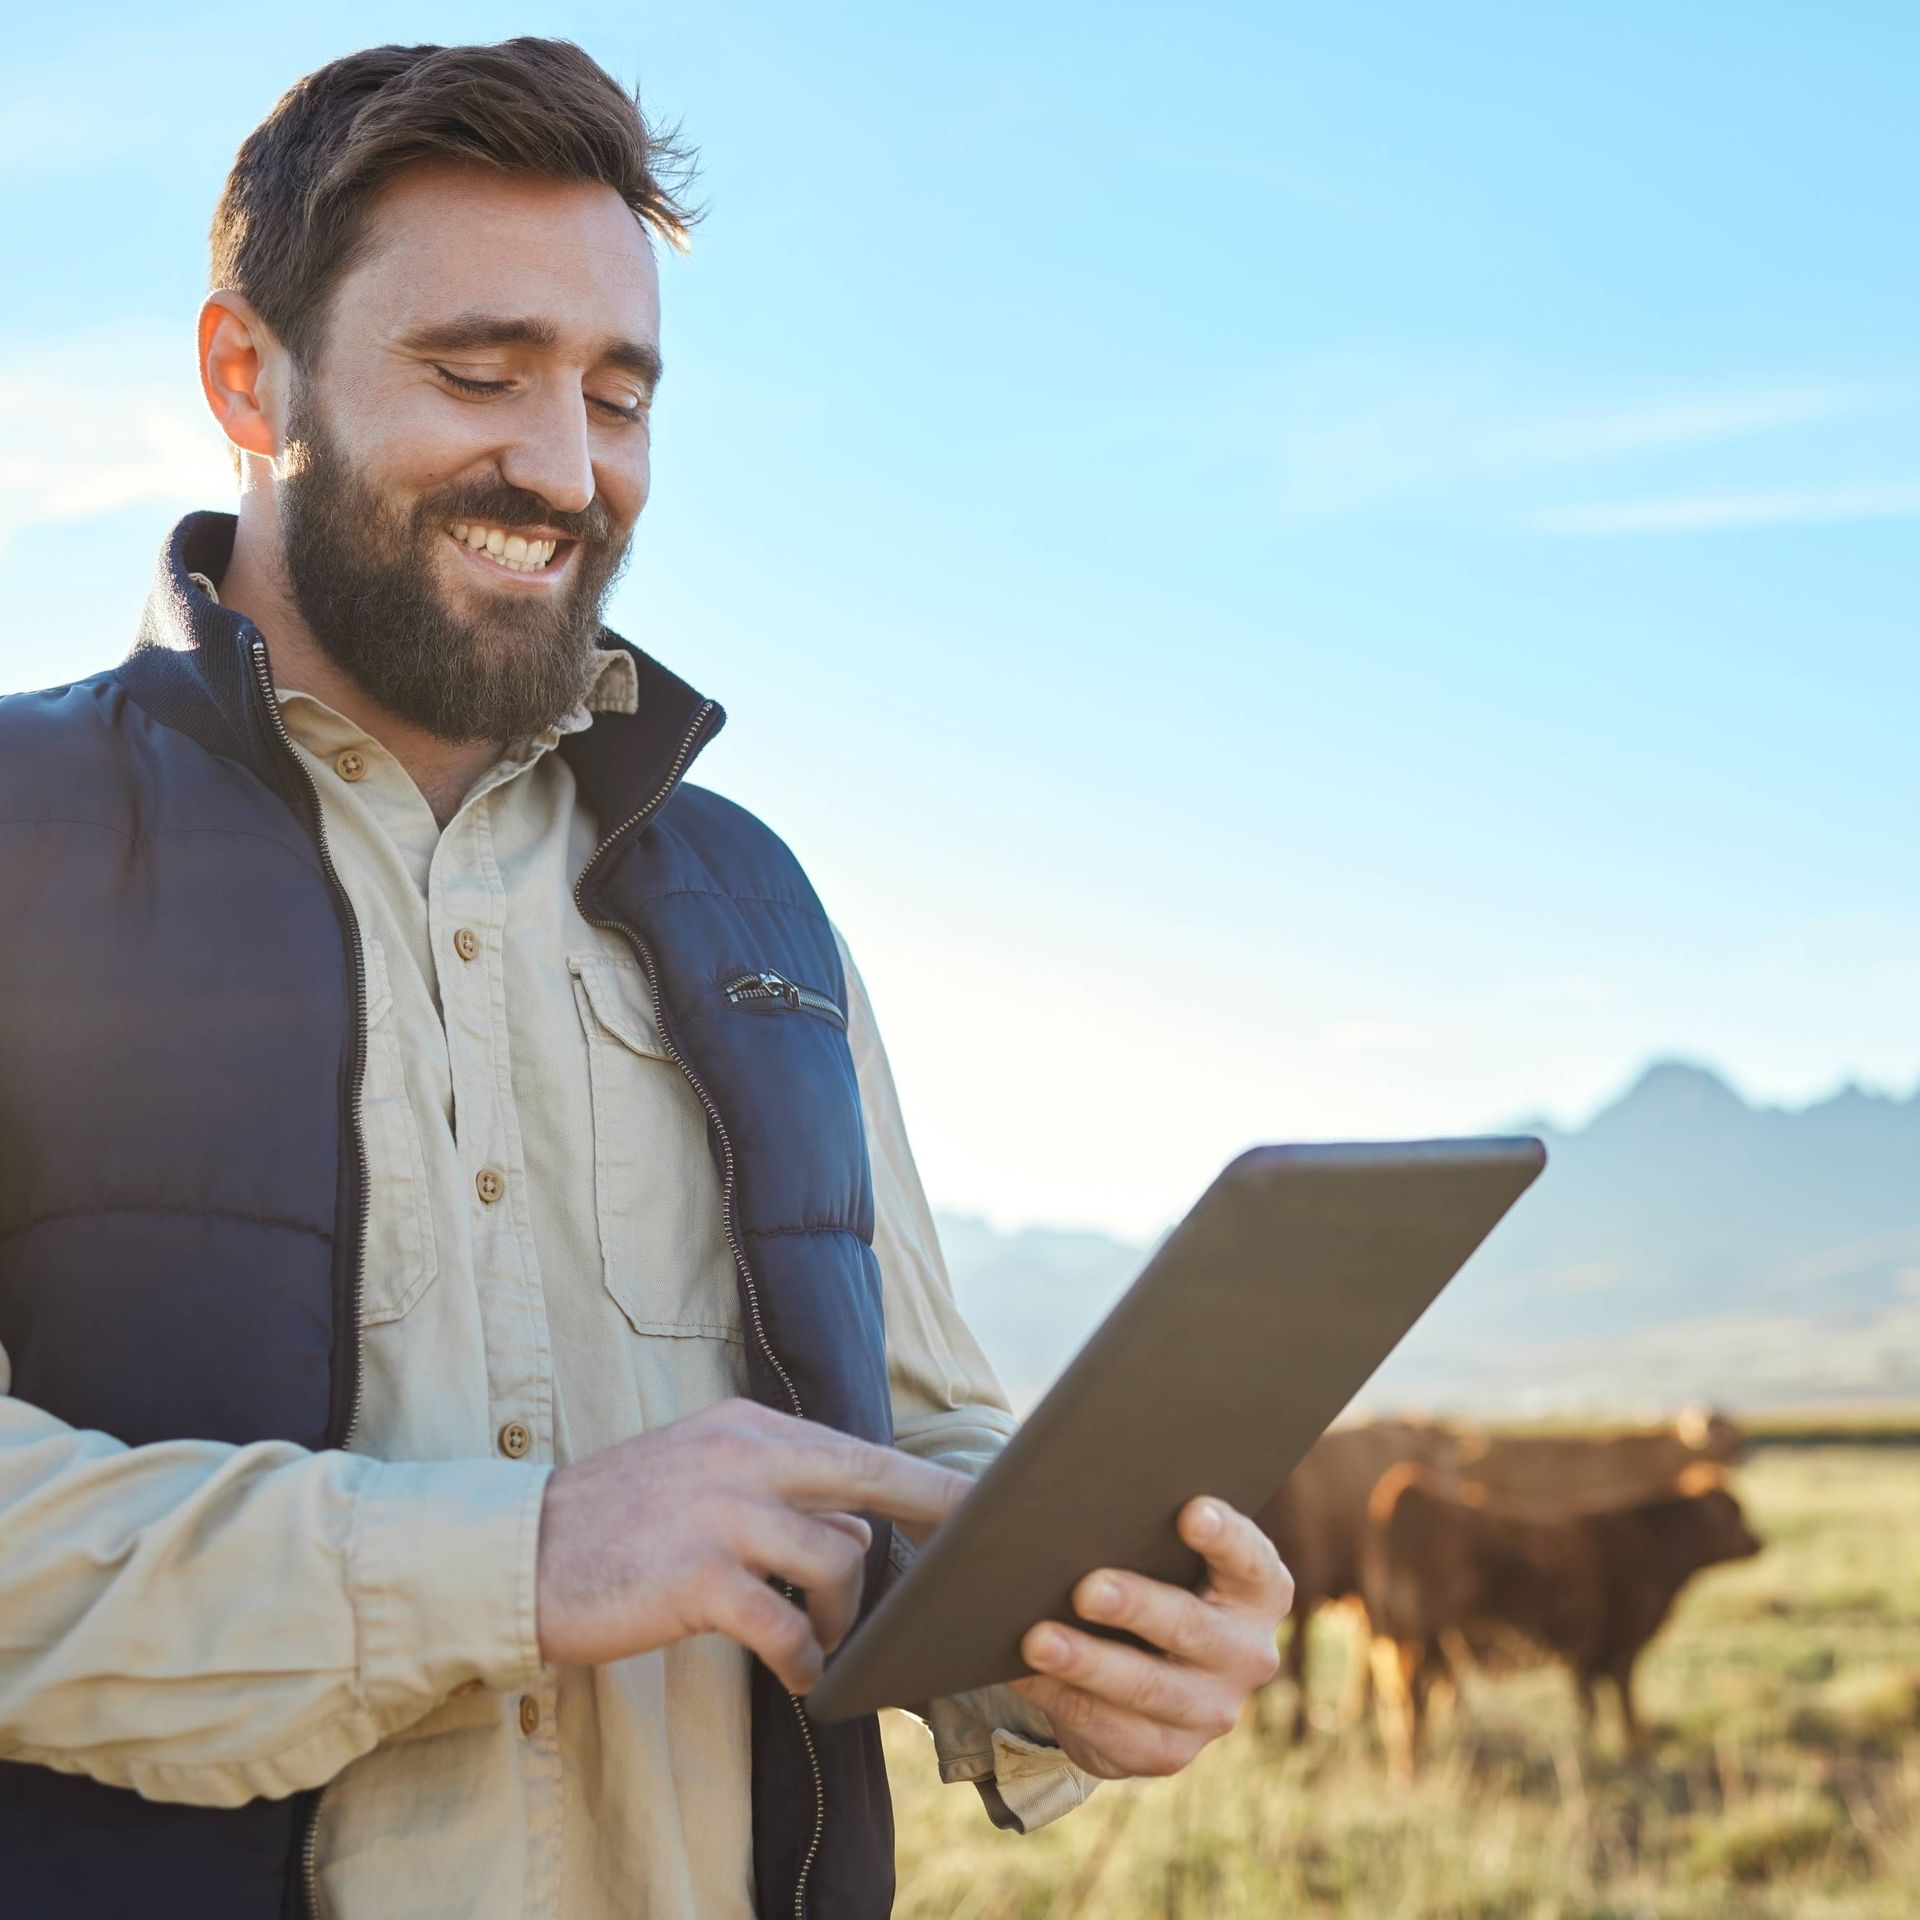 Image of a livestock farmer using a tablet in a field